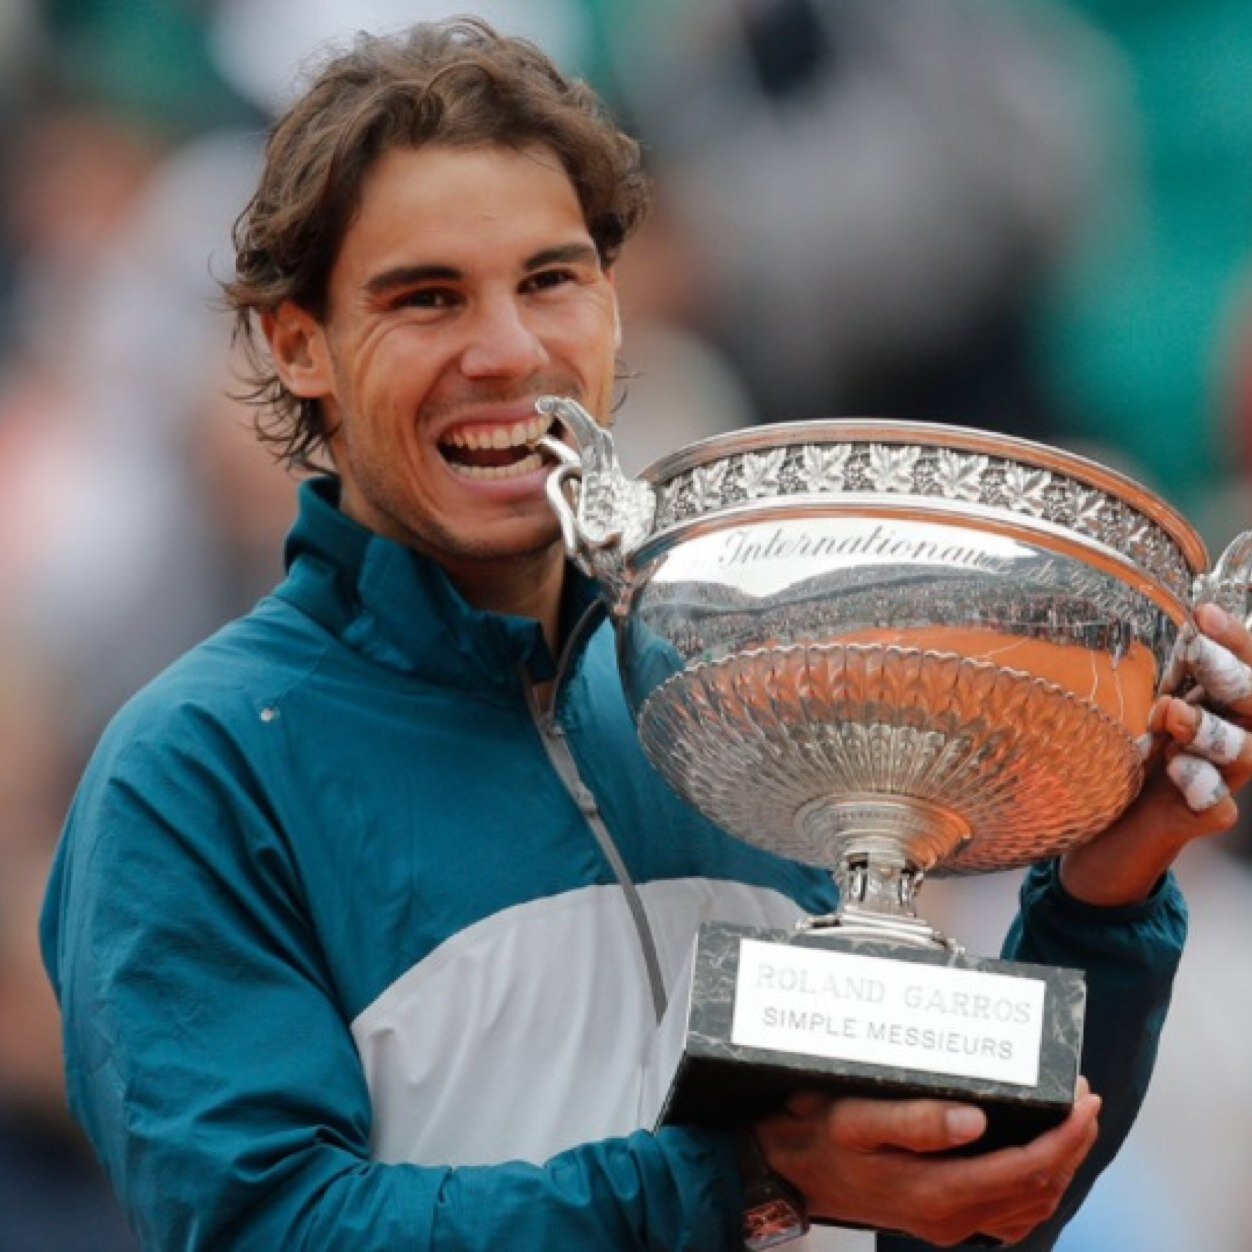 All about Rafa.King of the clay.That is all i have to say.#Vamos #Rafa